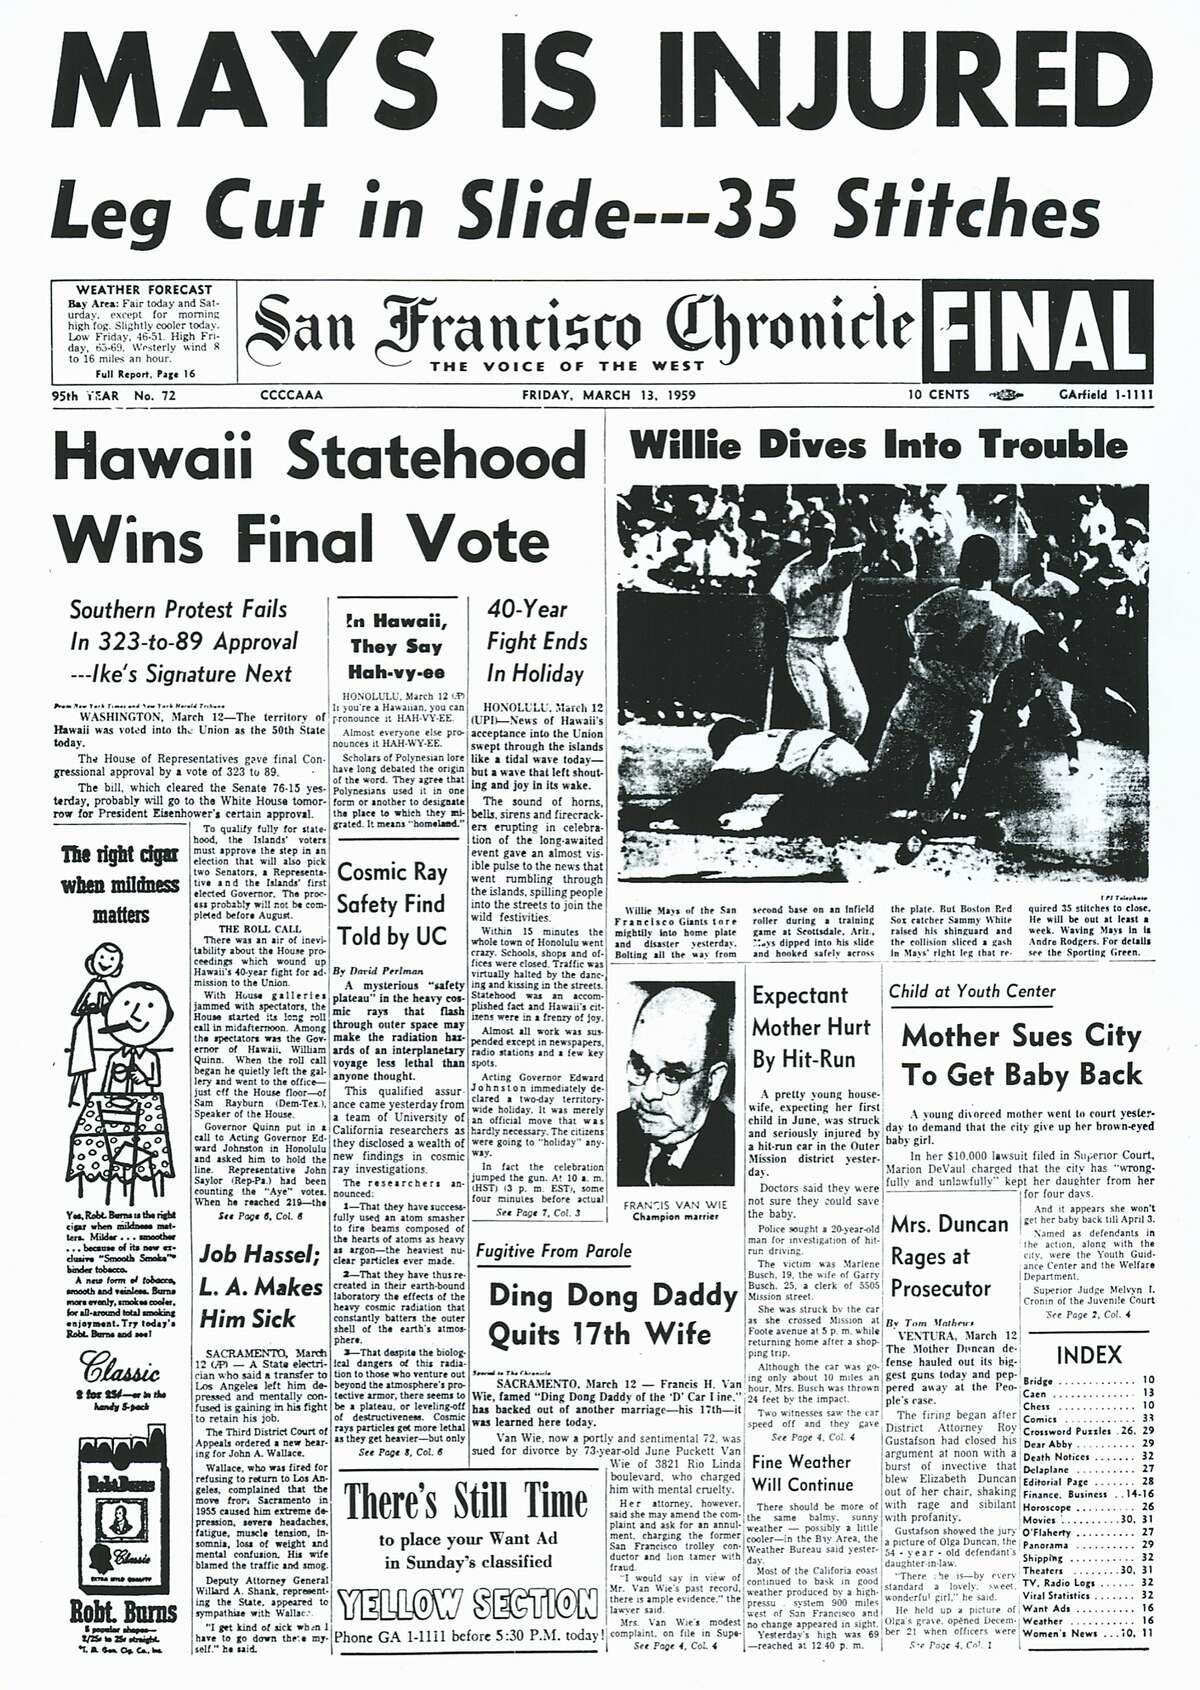 The Chronicle's front page from March 13, 1959, covers Hawaii gaining statehood and Willie Mays getting injured.